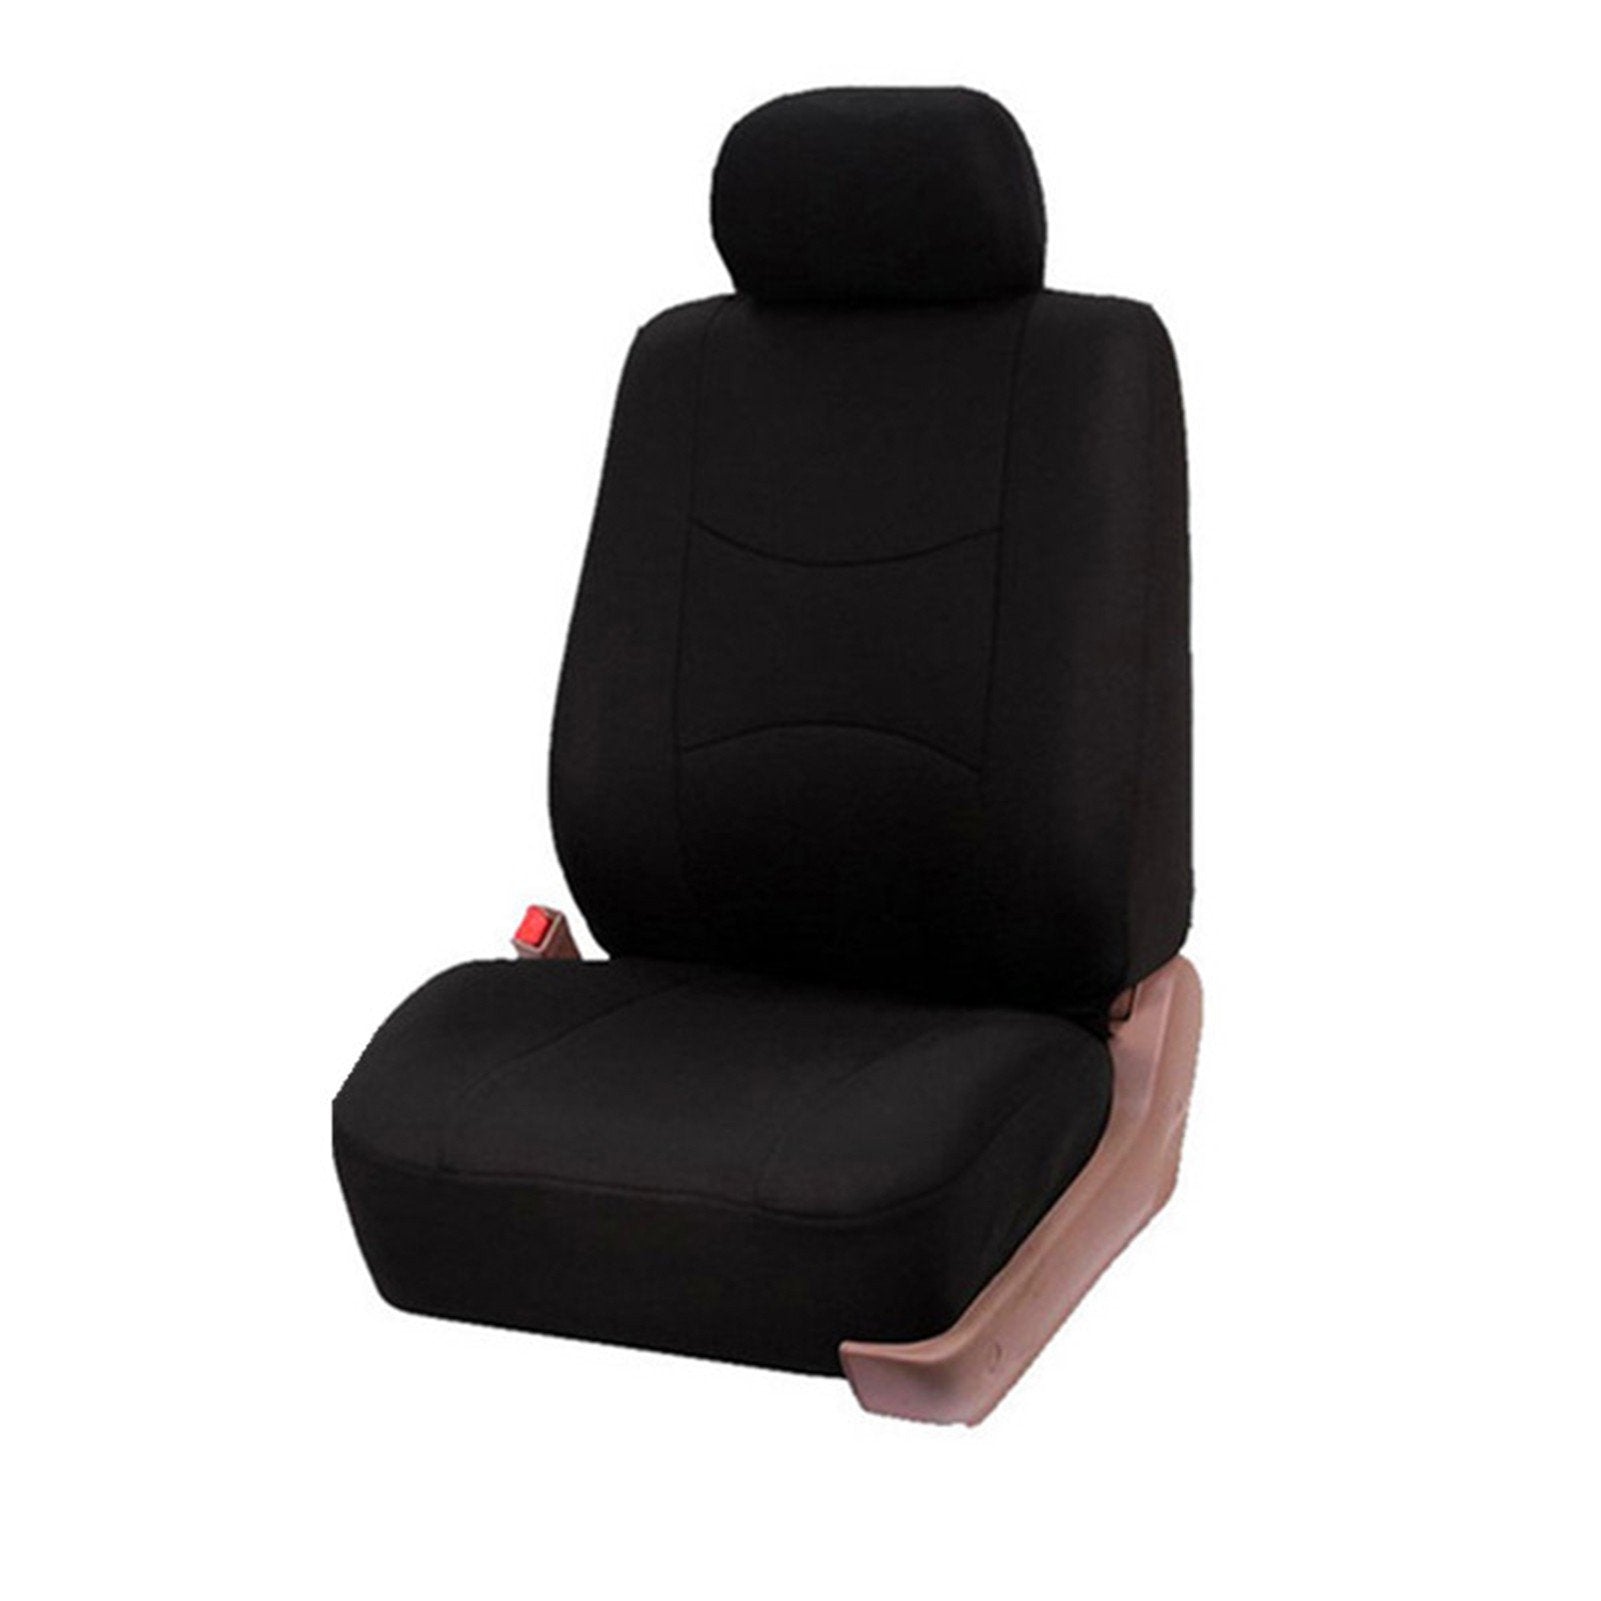 Universal Car Seat Cover Auto Interior Decoration Protectors Full Surround Headrest and Pad Backrest